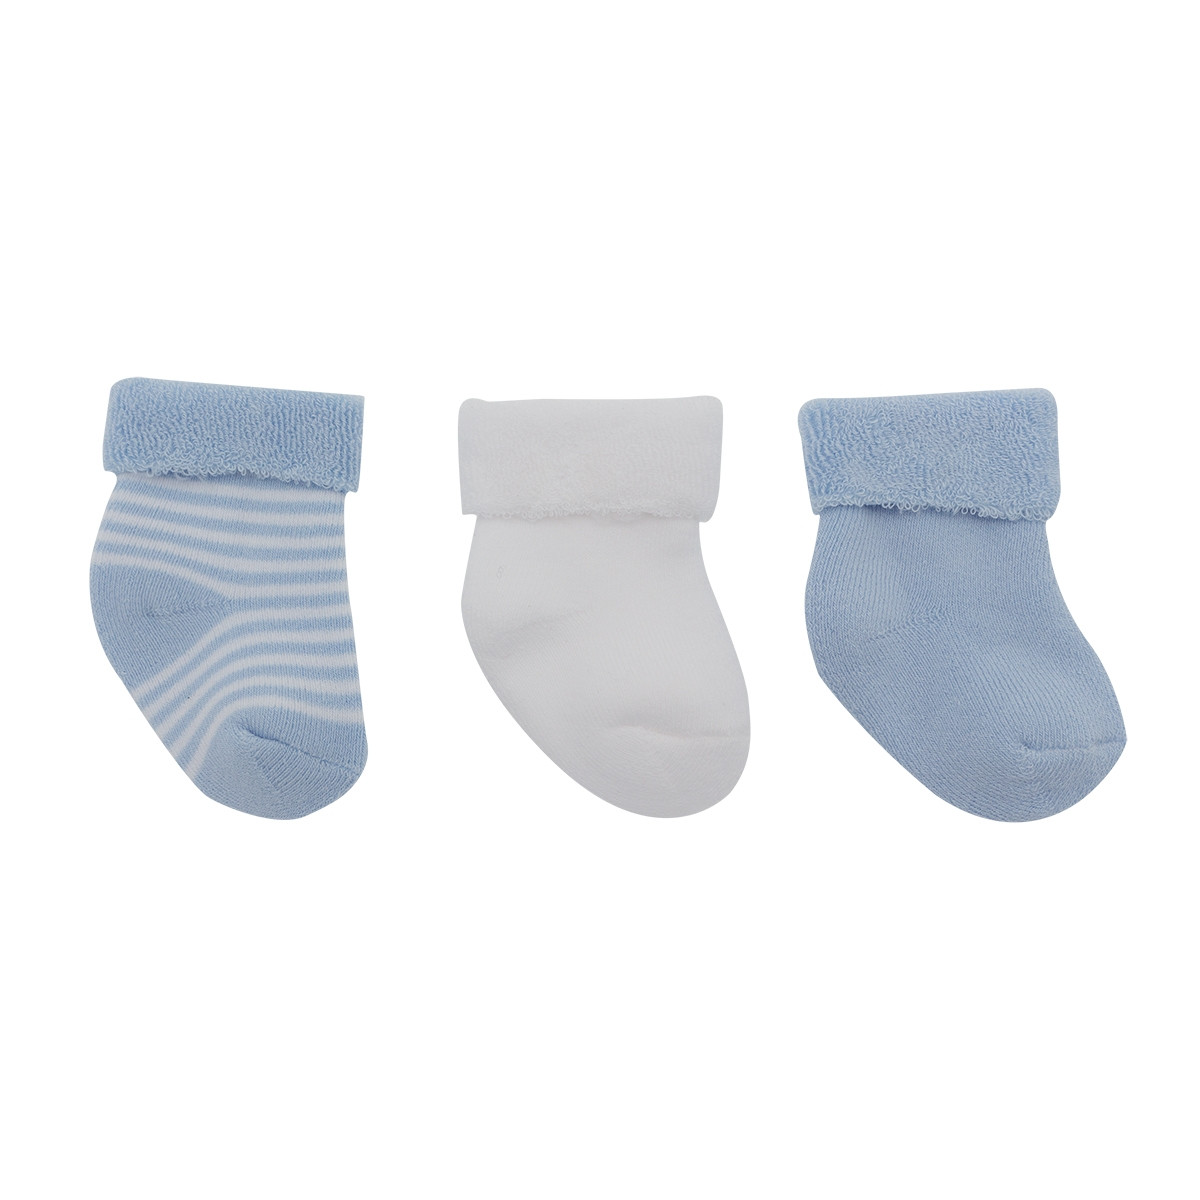 SET 3 SOCKS FOR BABY LISO BLUE CAMBRASS - 1